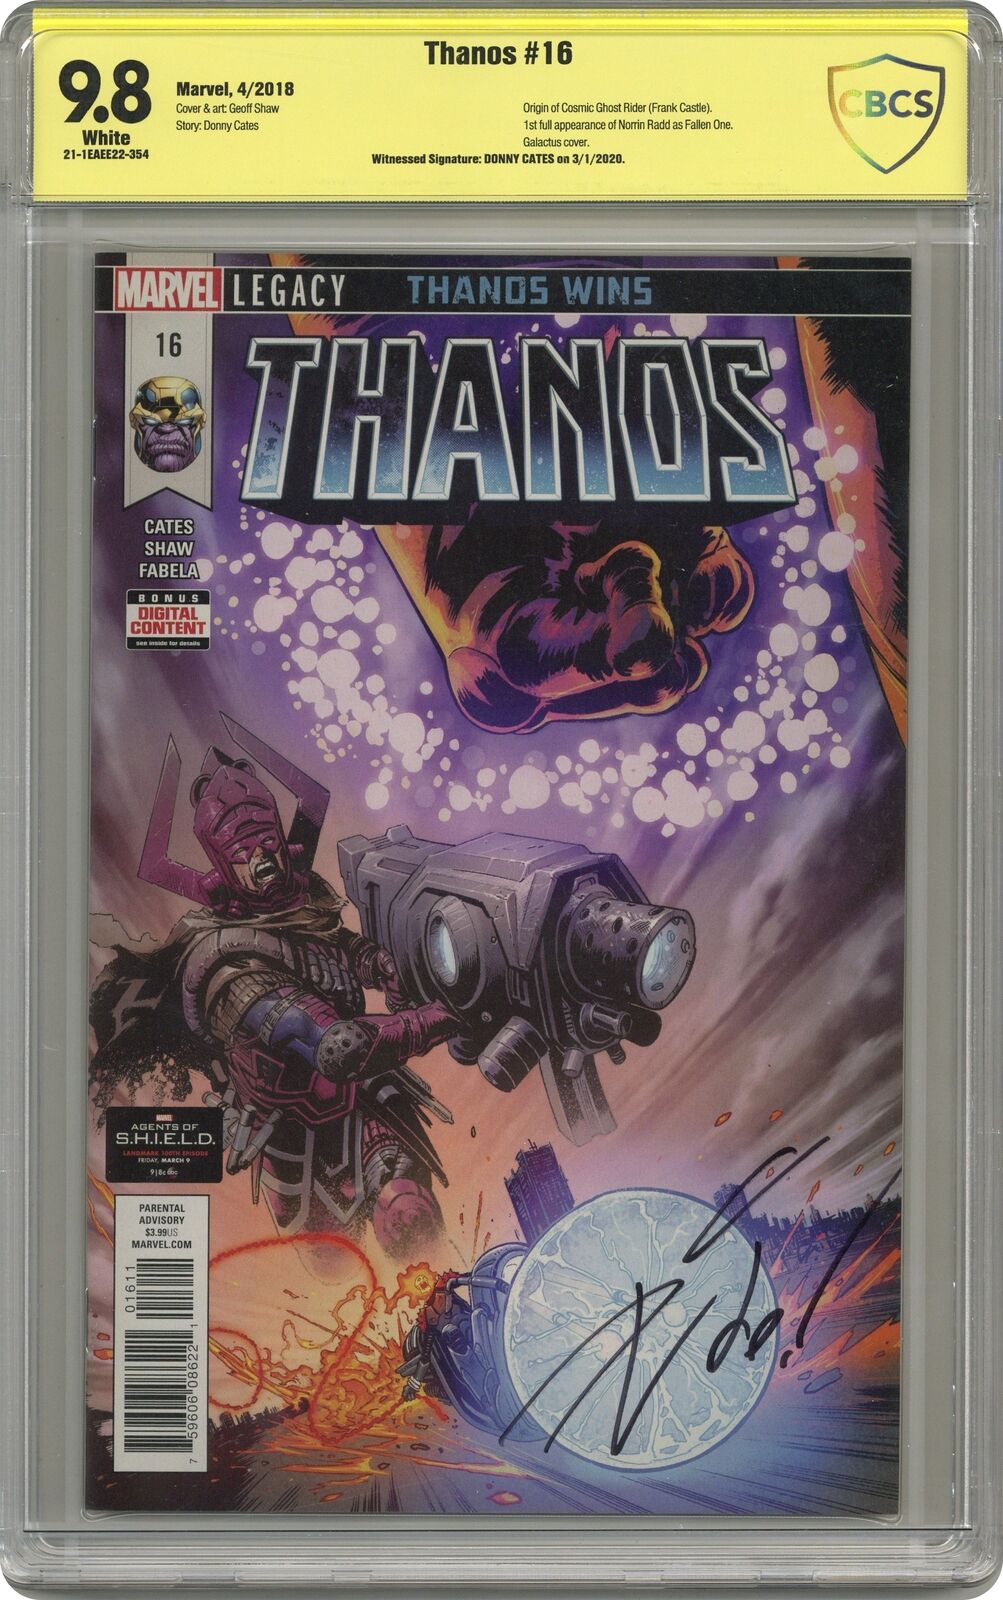 Thanos #16A Shaw CBCS 9.8 SS Cates 2018 21-1EAEE22-354